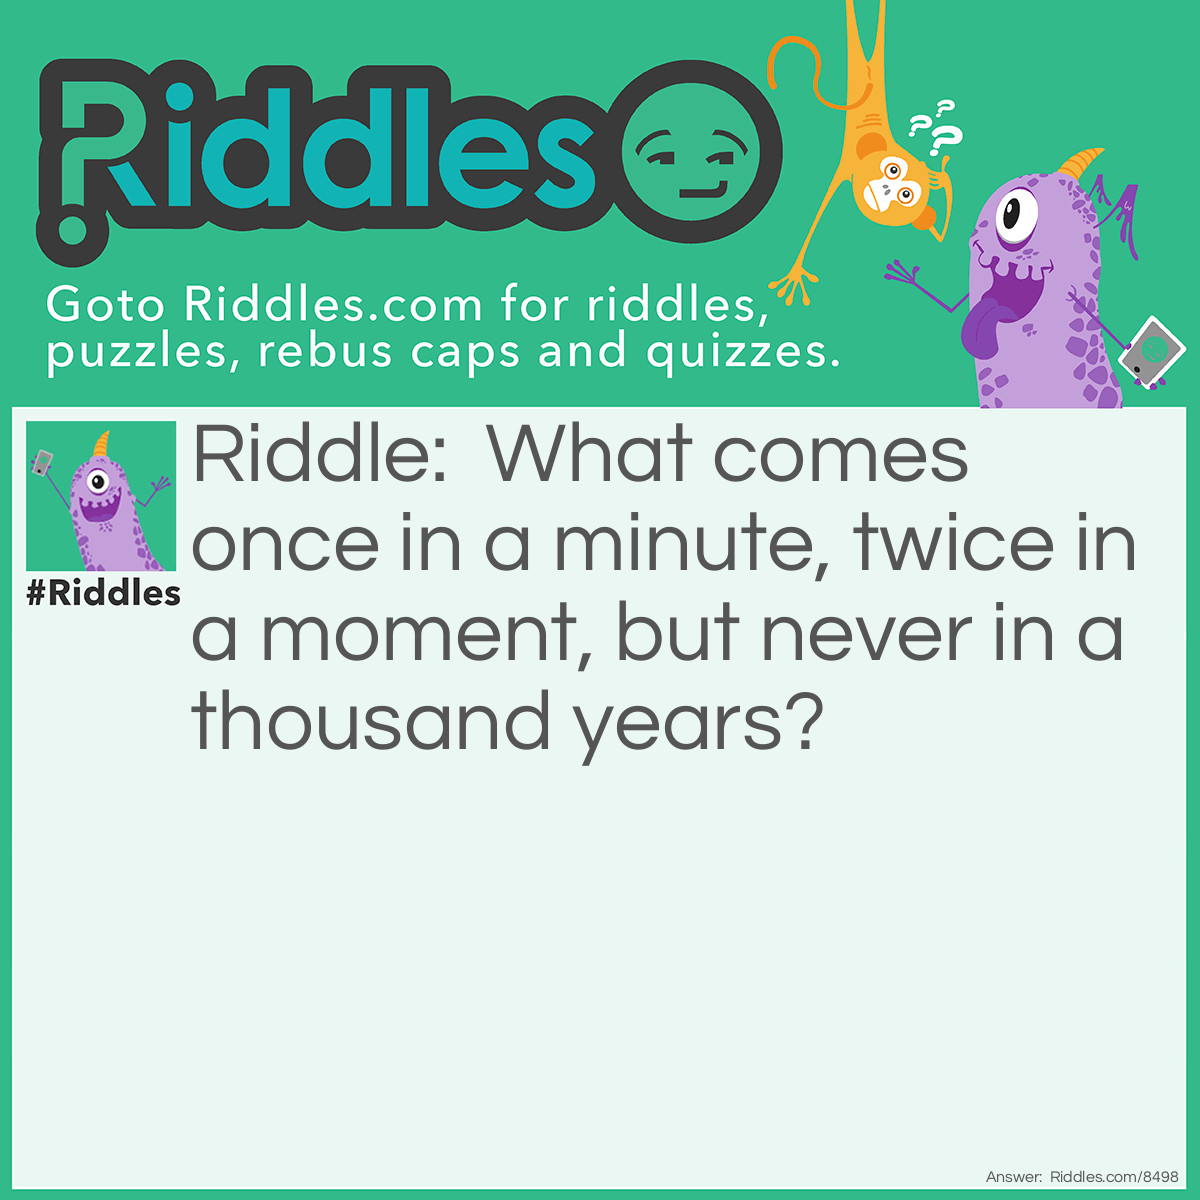 Riddle: What comes once in a minute, twice in a moment, but never in a thousand years? Answer: The letter “M”.